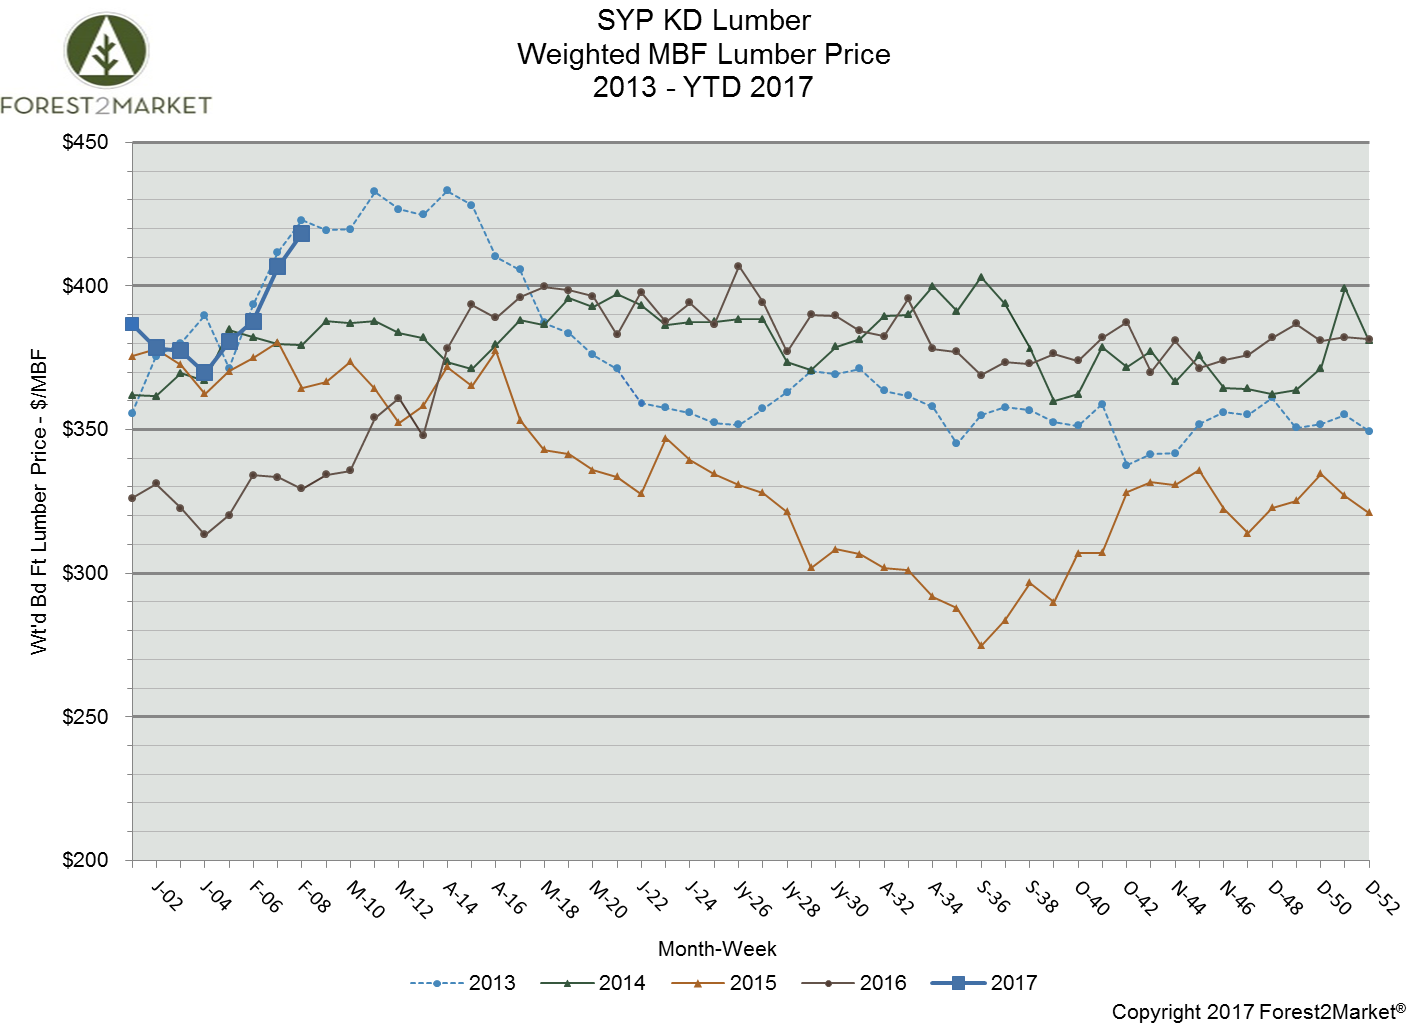 Southern Yellow Pine Lumber Prices Soar in Feb. 2017